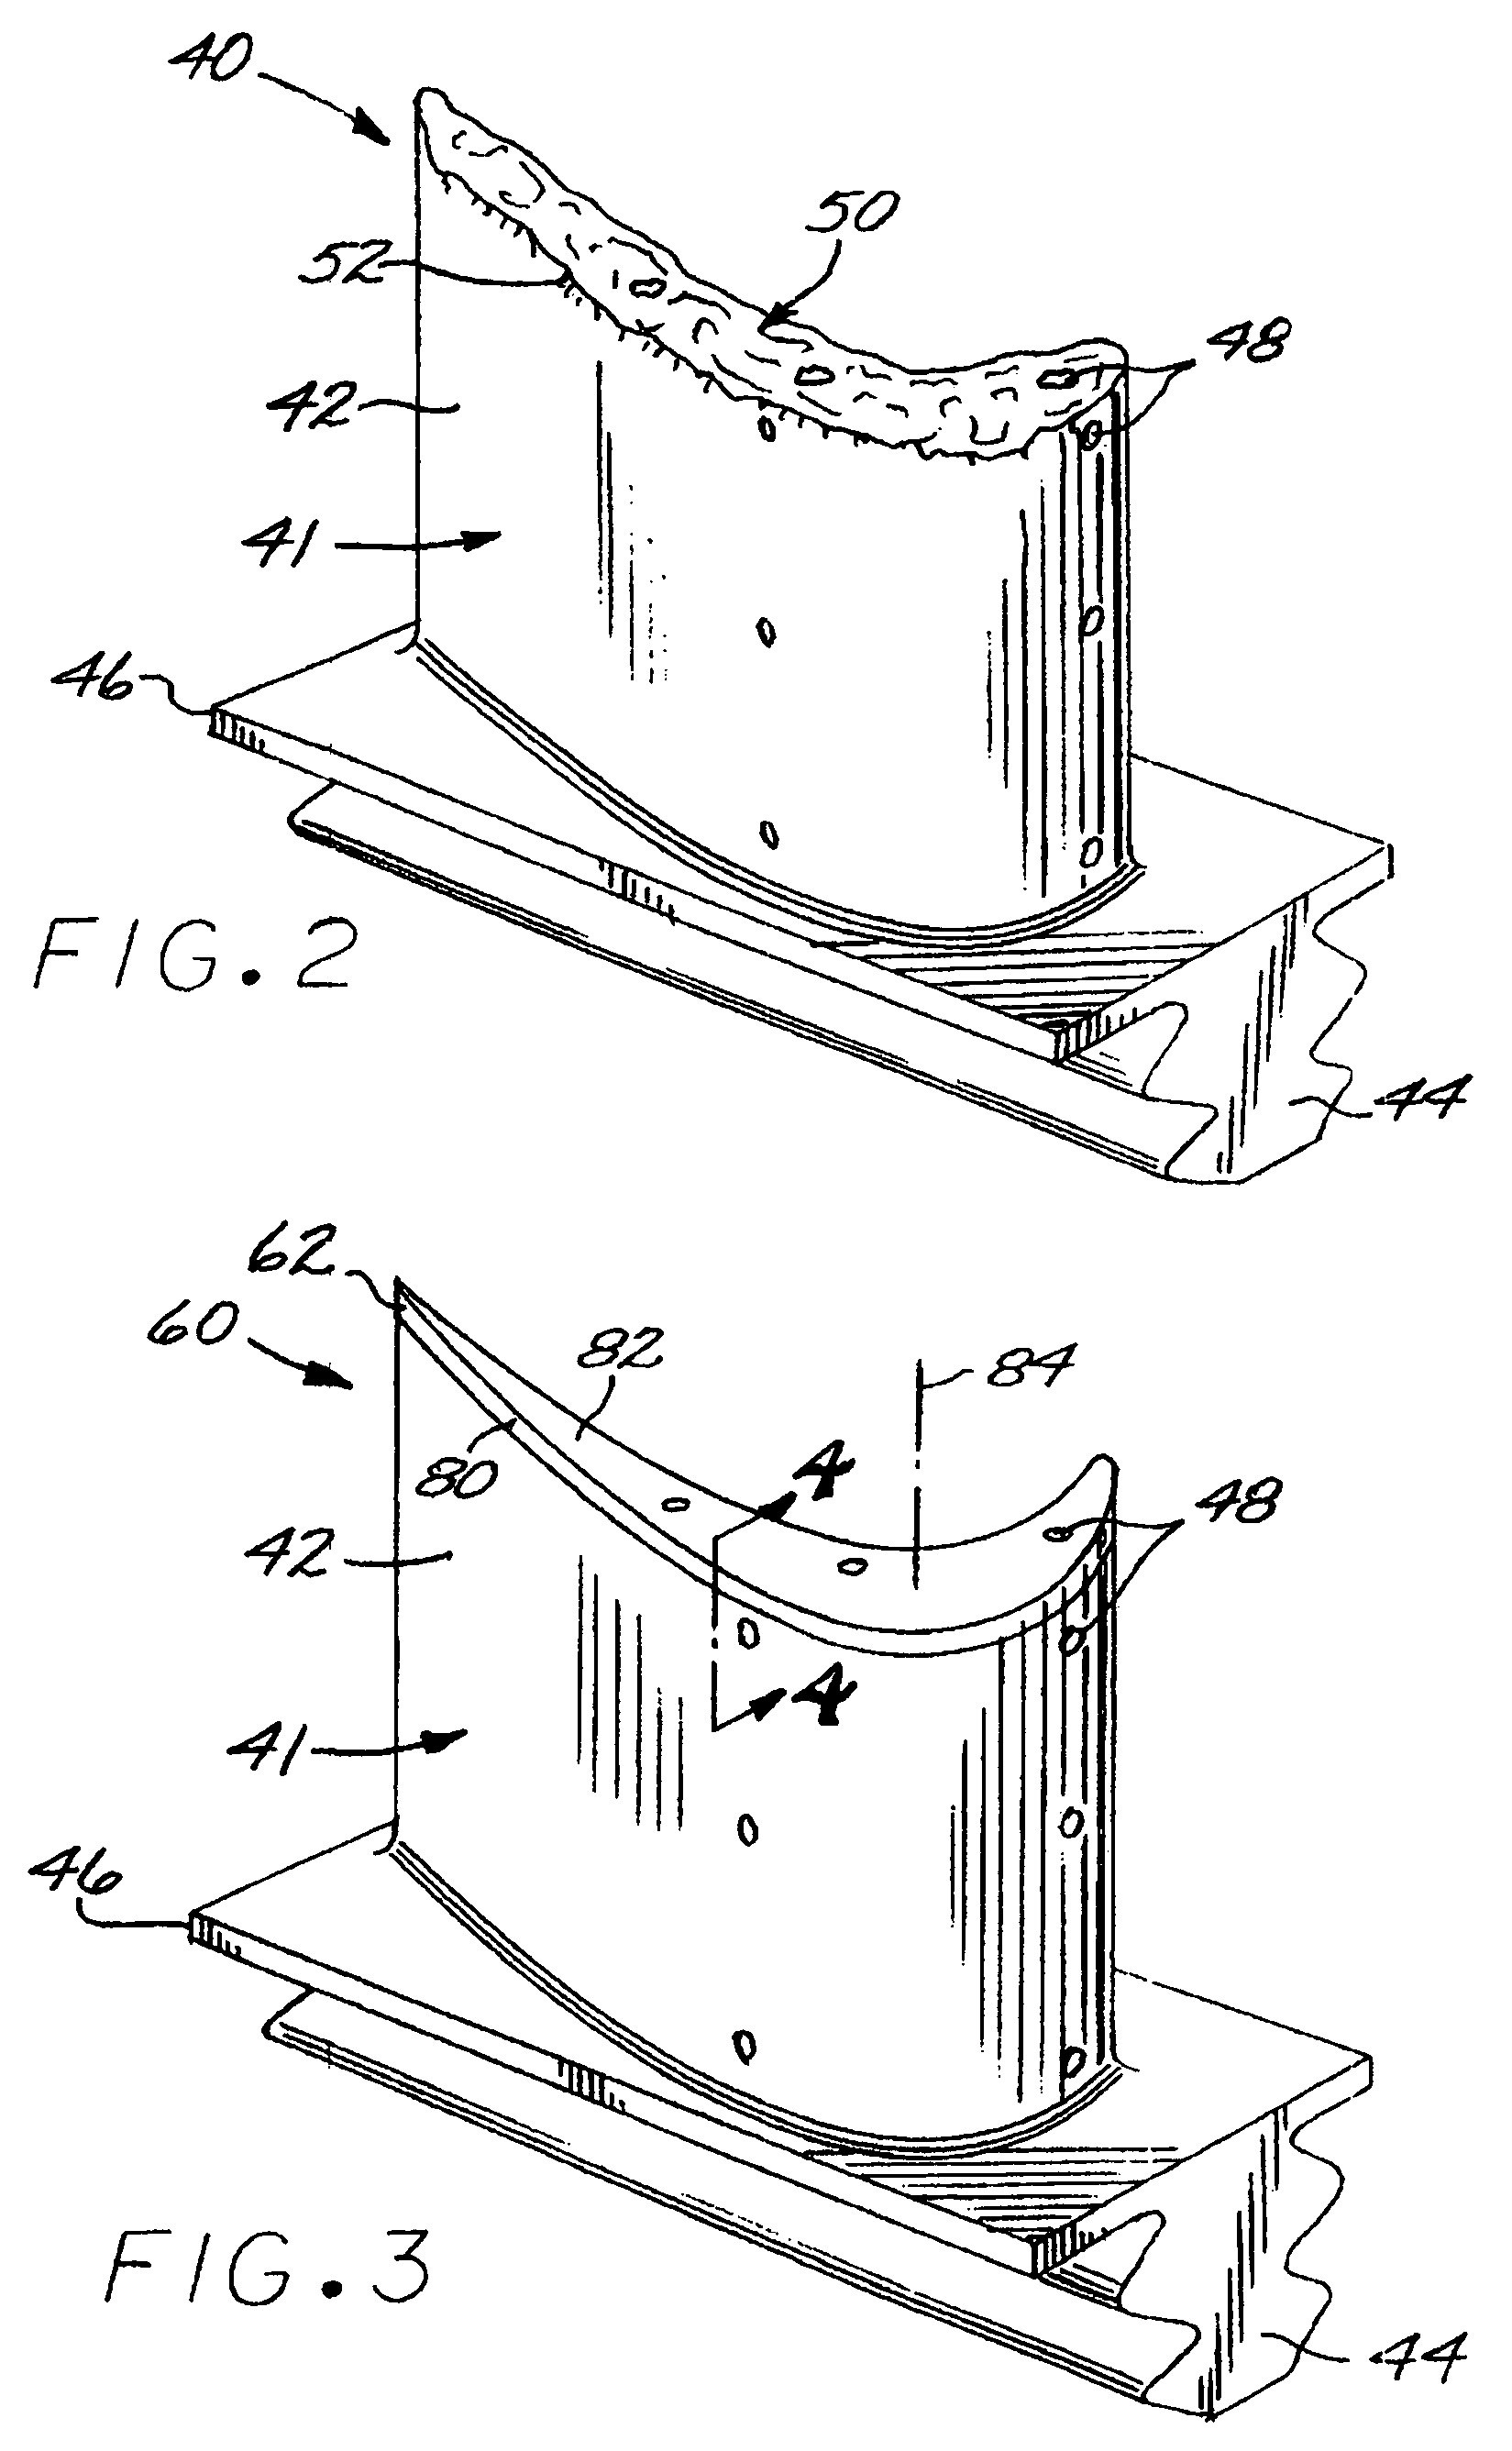 Repair of gas turbine blade tip without recoating the repaired blade tip